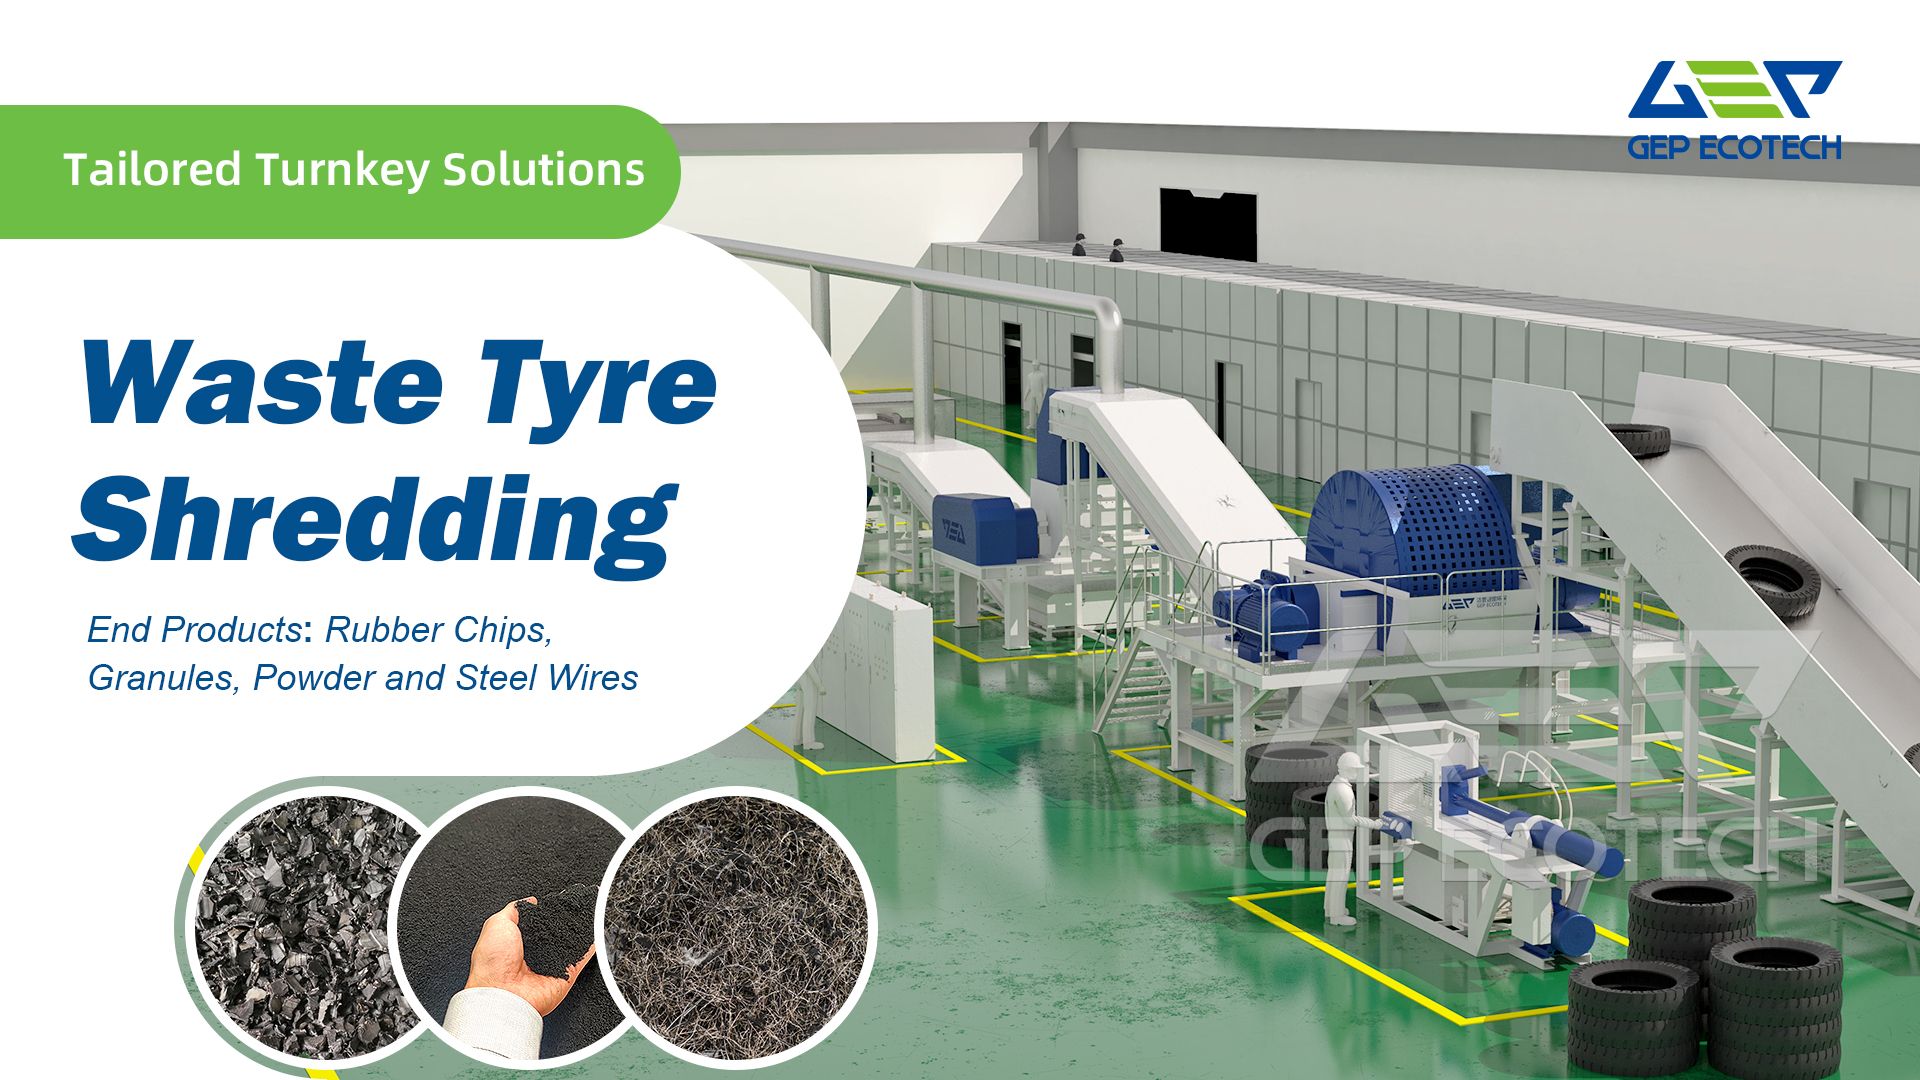 Advanced GEP ECOTECH Solutions for Shredding, Sorting, and Recycling Waste Tires